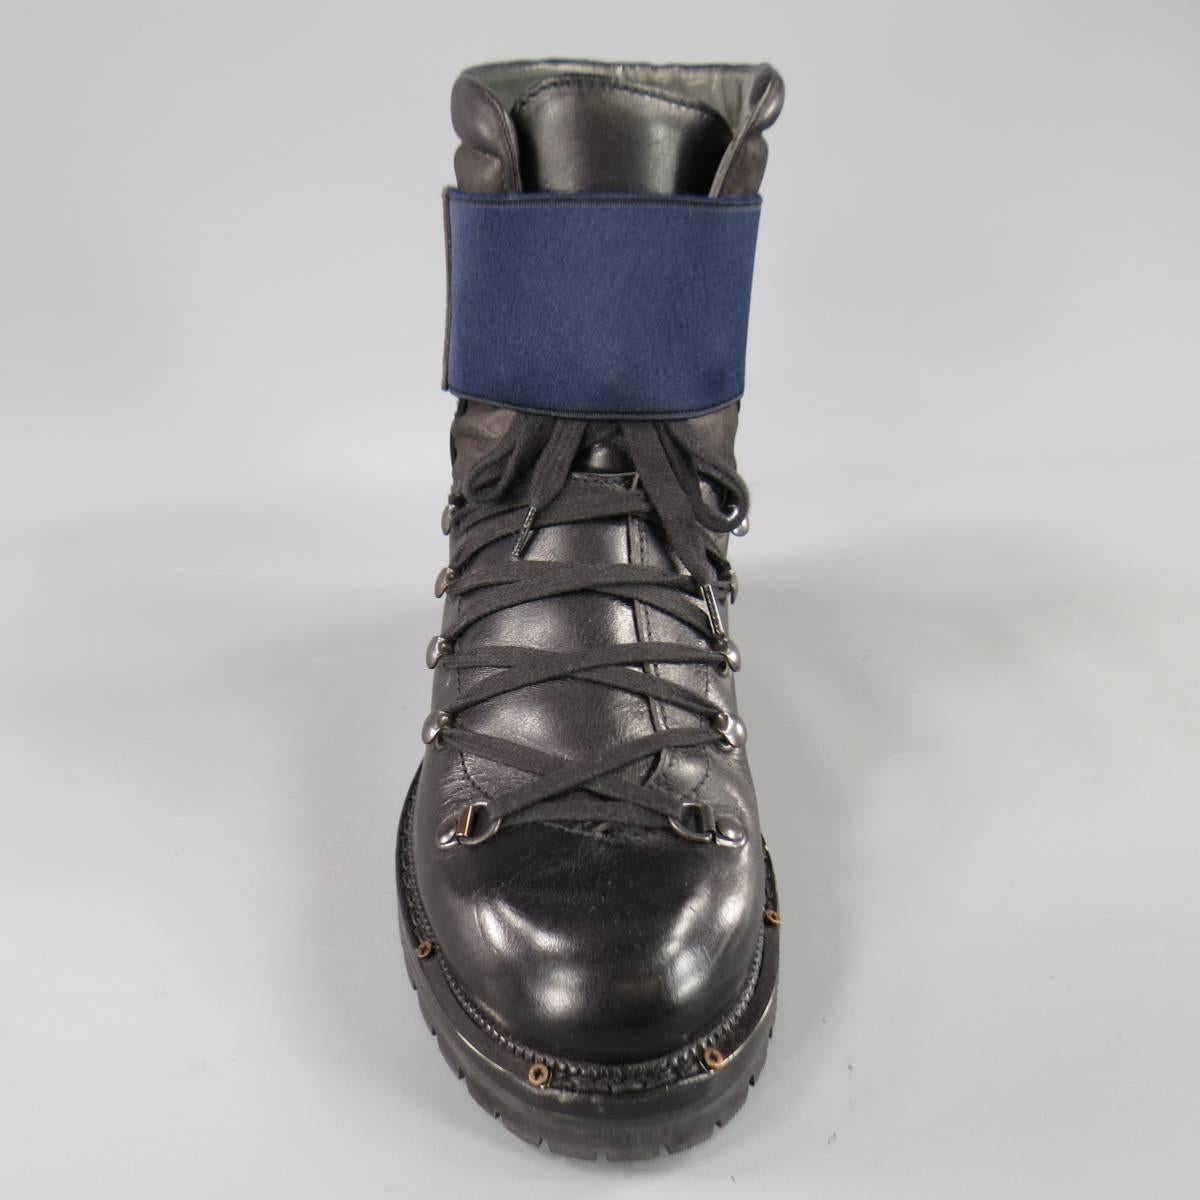 These ultra chic LANVIN Mountain boots come in smooth black leather and feature a wide lace up front with gunmetal tone prongs designed after a traditional hiking boot, thick, elastic velcro strap in navy blue, thick hiking sole with metal plate